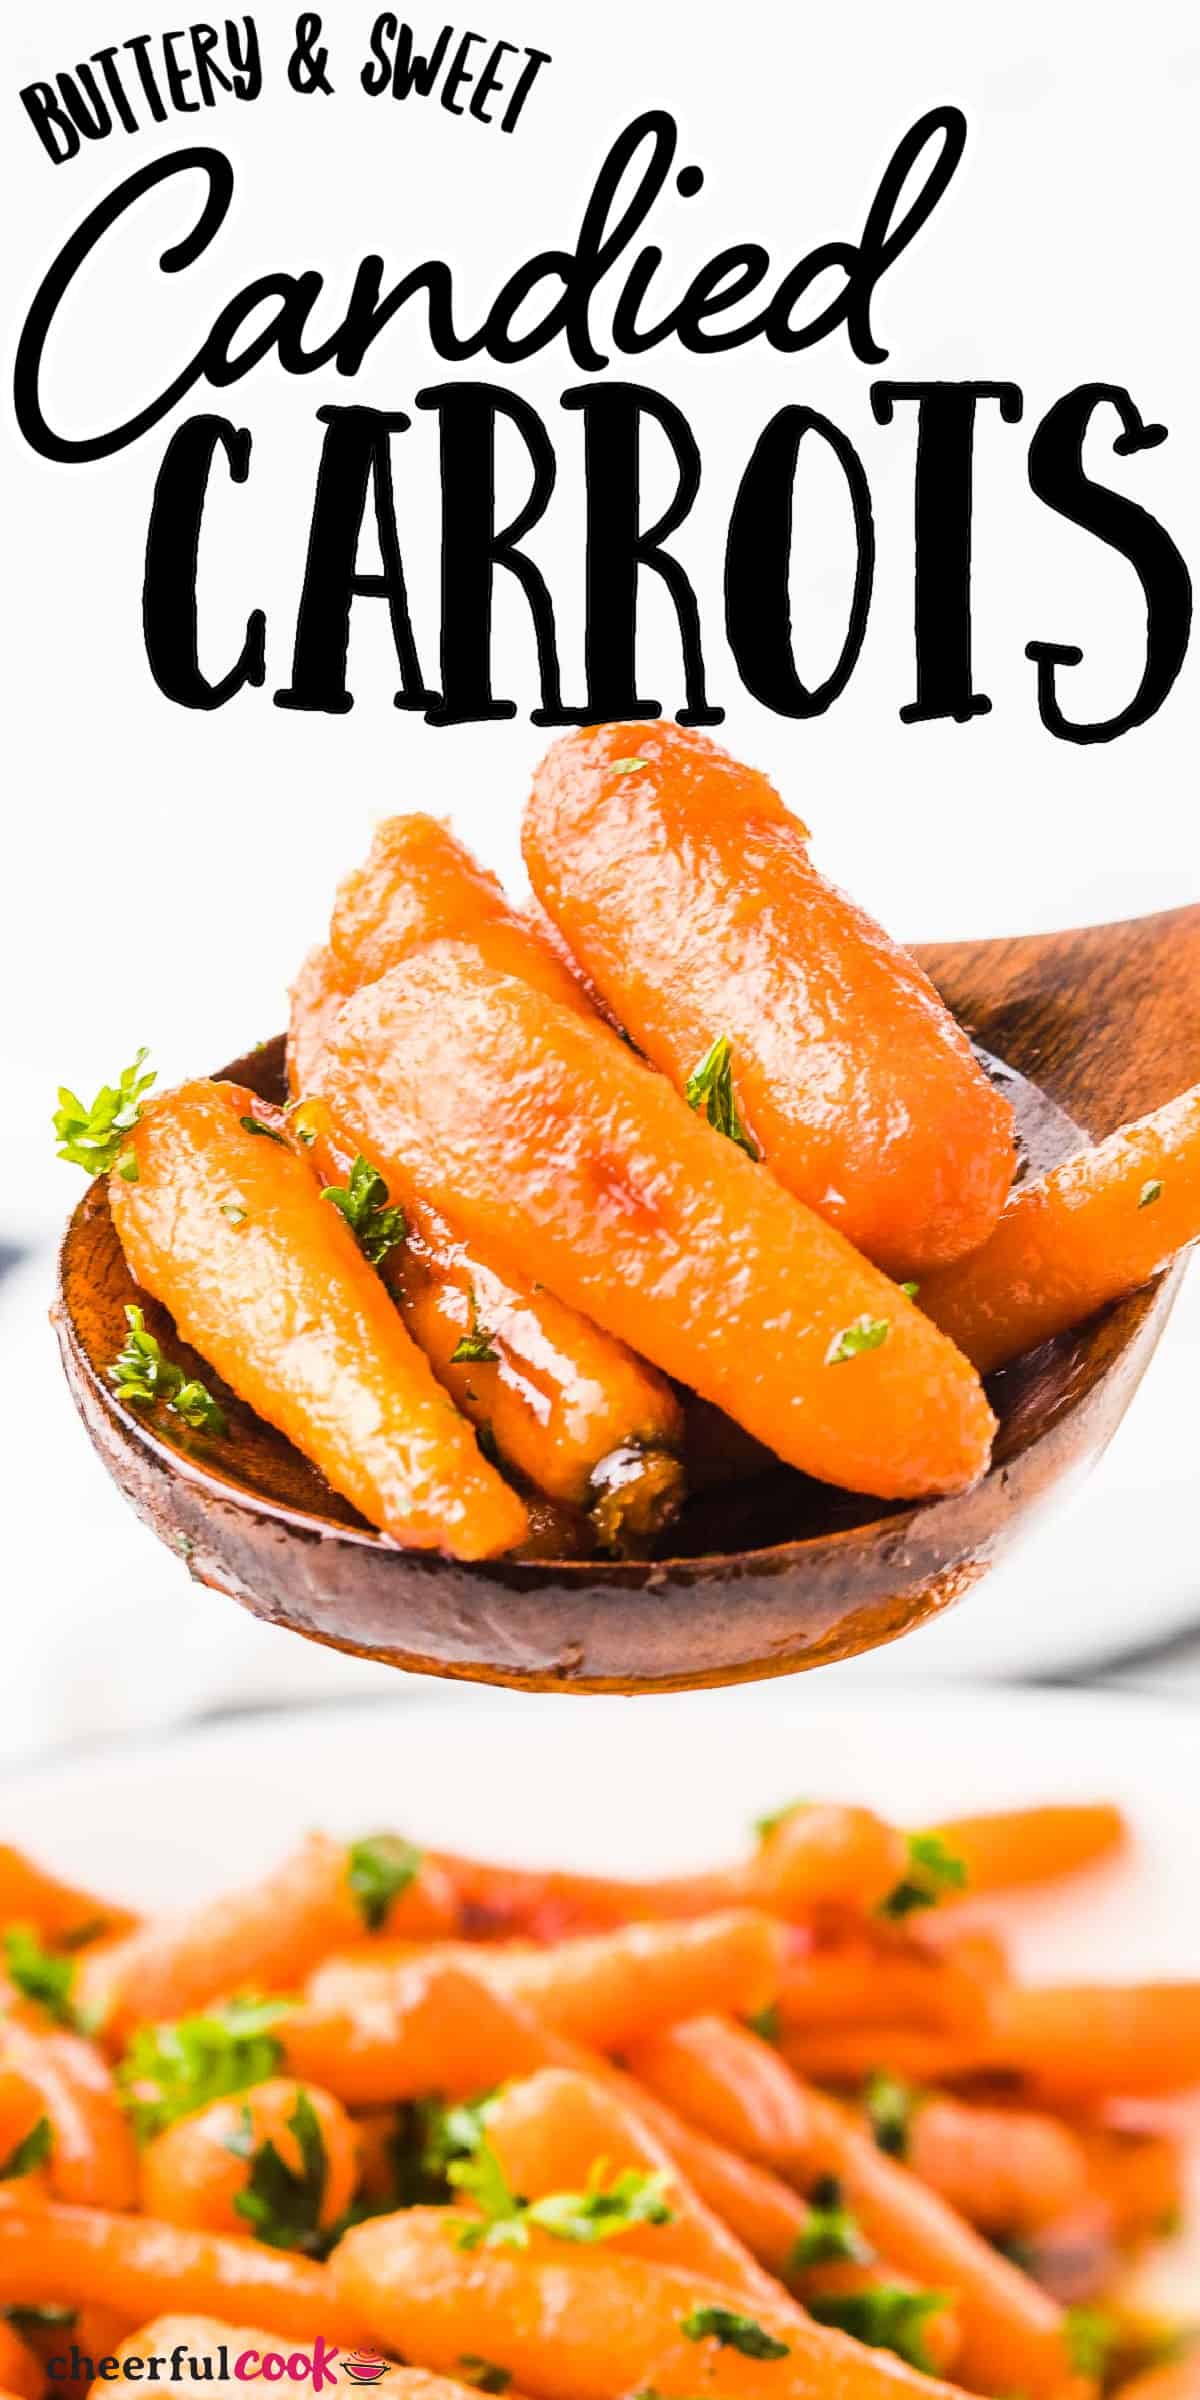 Candied Carrots are the perfect side dish for any occasion! They're sweet, savory, and versatile - you can serve them with your holiday dinner or enjoy them on a weeknight when time is tight. #candiedcarrots #sidedish #glazedcarrots #recipe via @cheerfulcook